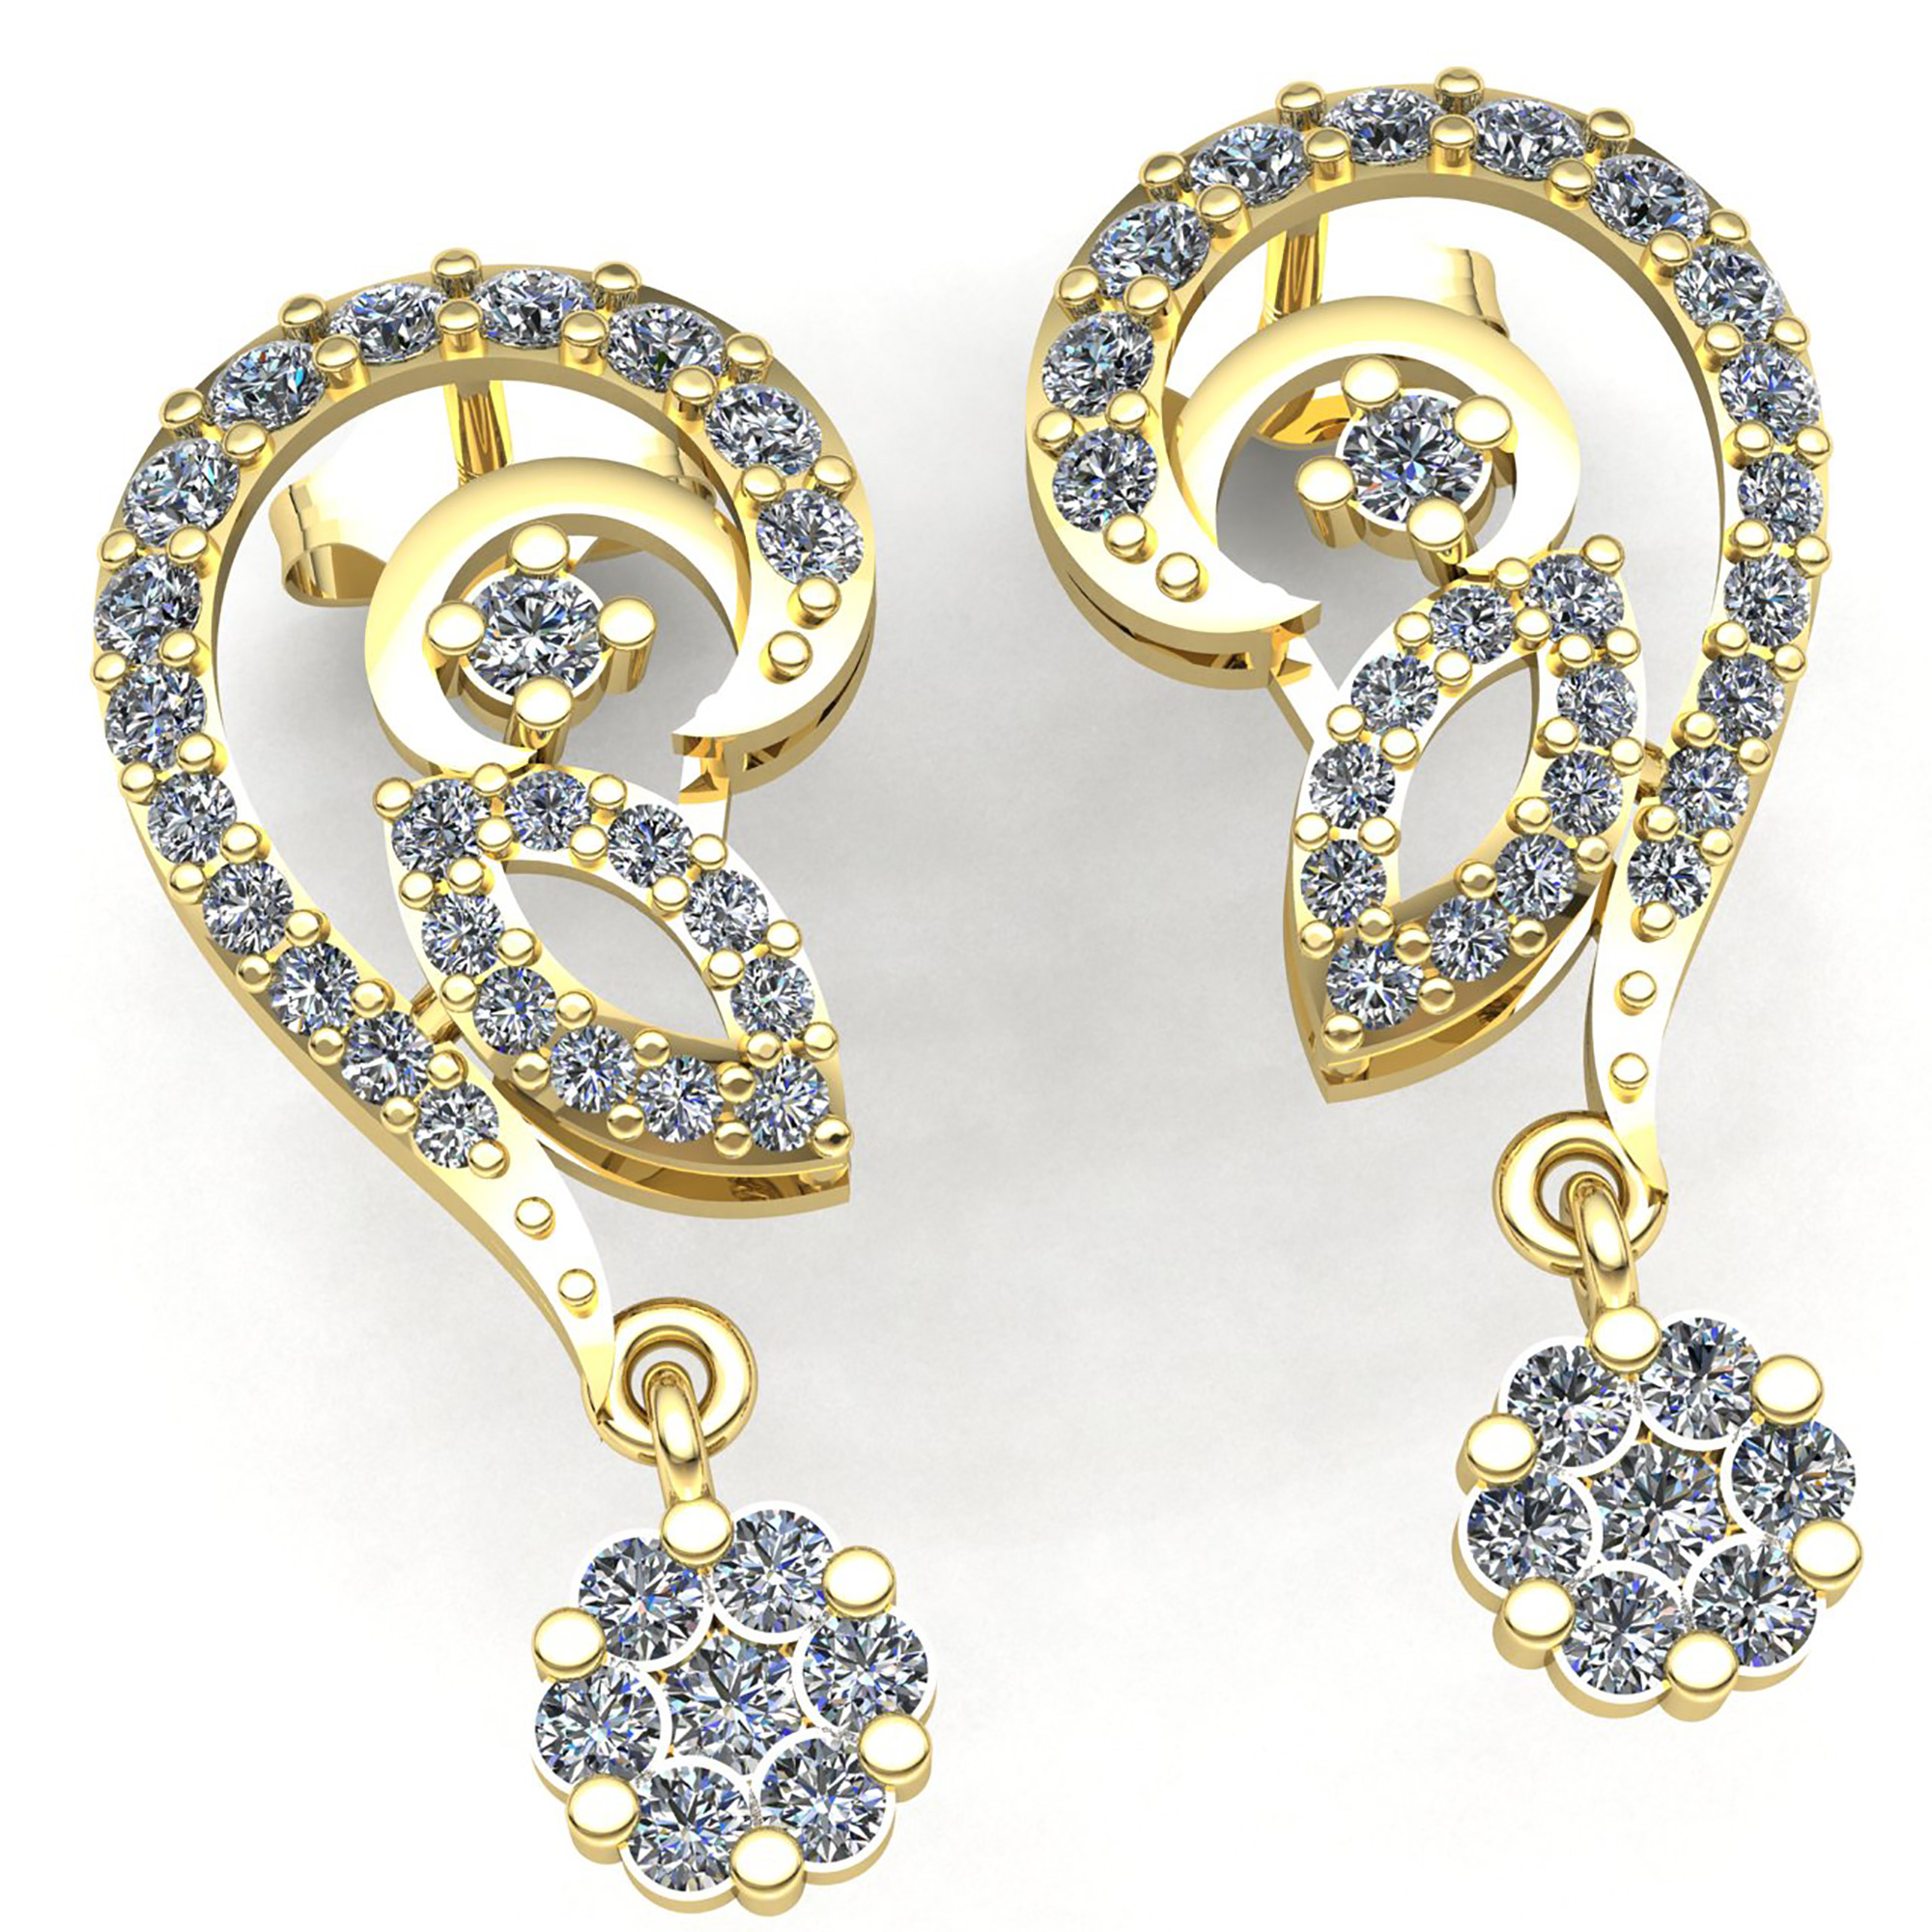 Jewel We Sell 3ctw Round Brilliant Cut Diamond Ladies For Her Hanging Earrings 14K White, Yellow, or Rose Gold GH SI1